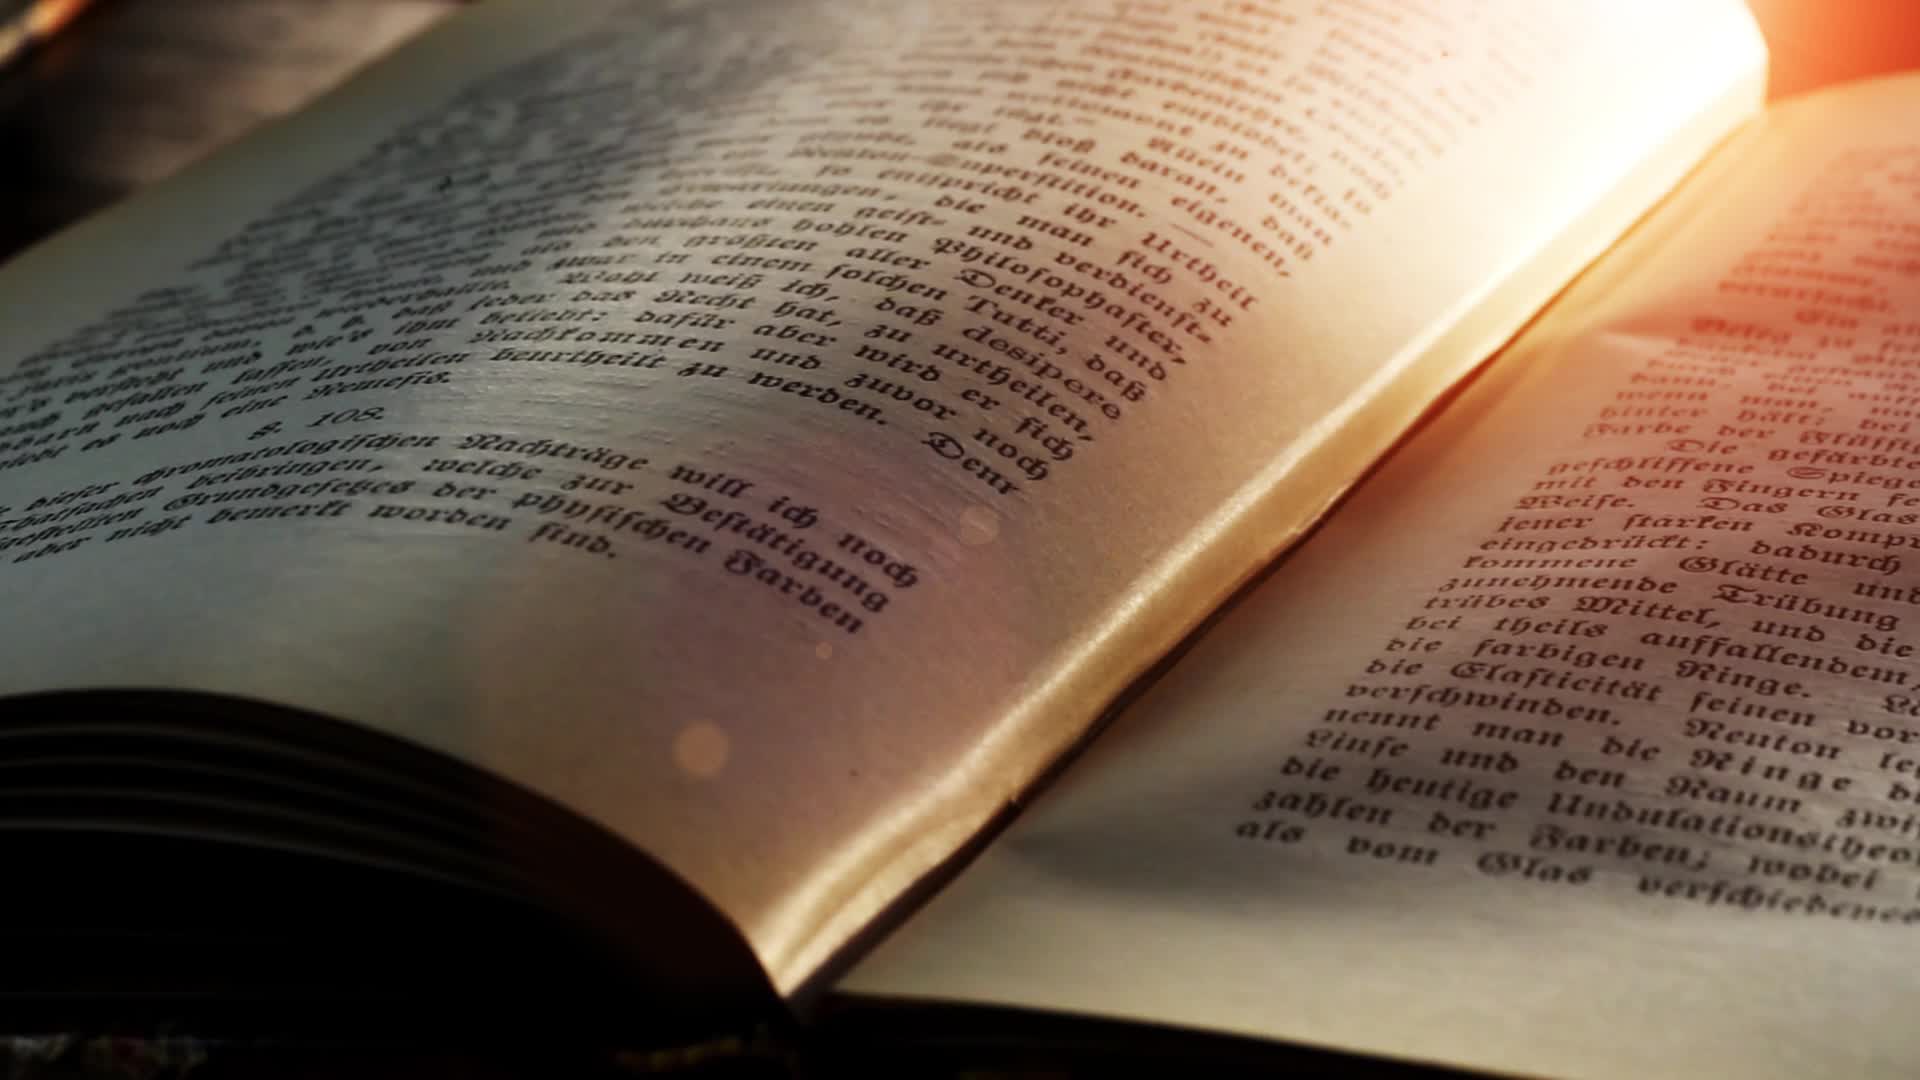 Bible book background - Free HD Video Clips & Stock Video Footage at  Videezy!